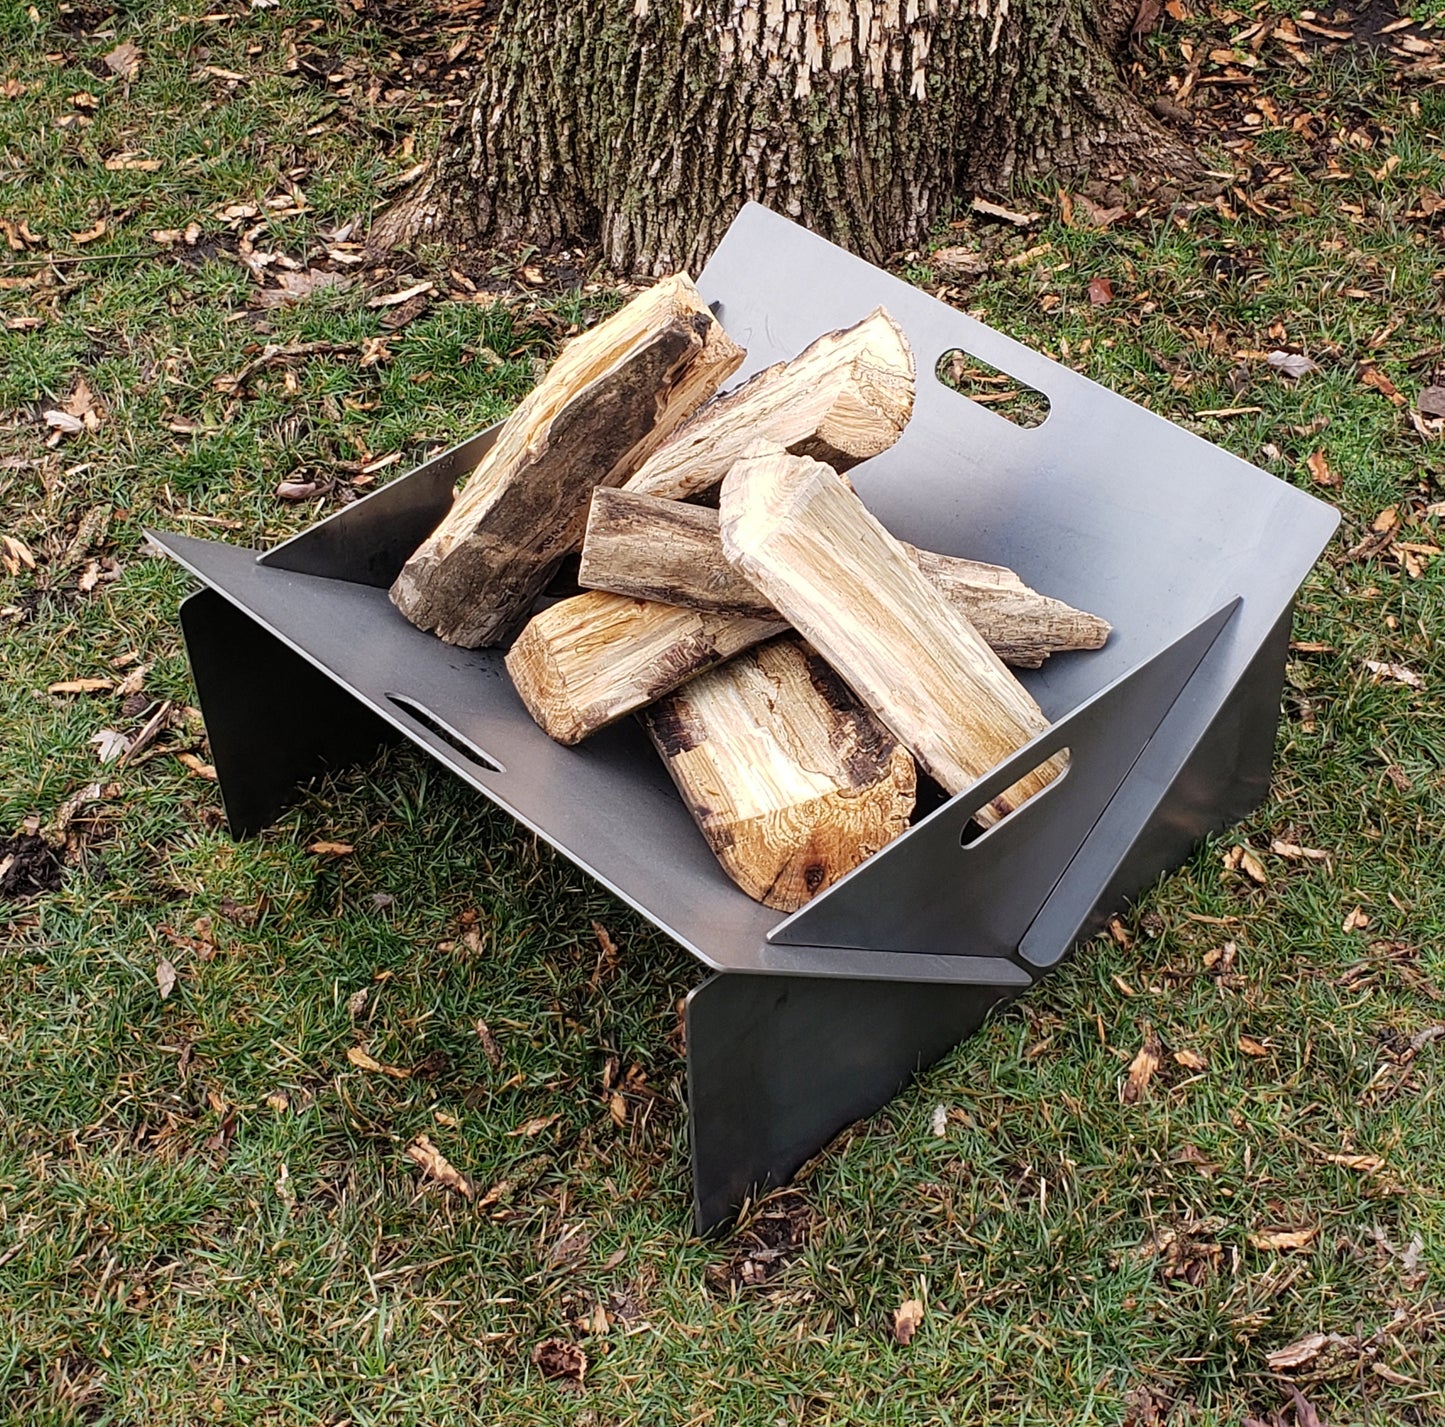 Collapsible Portable Fire Pit